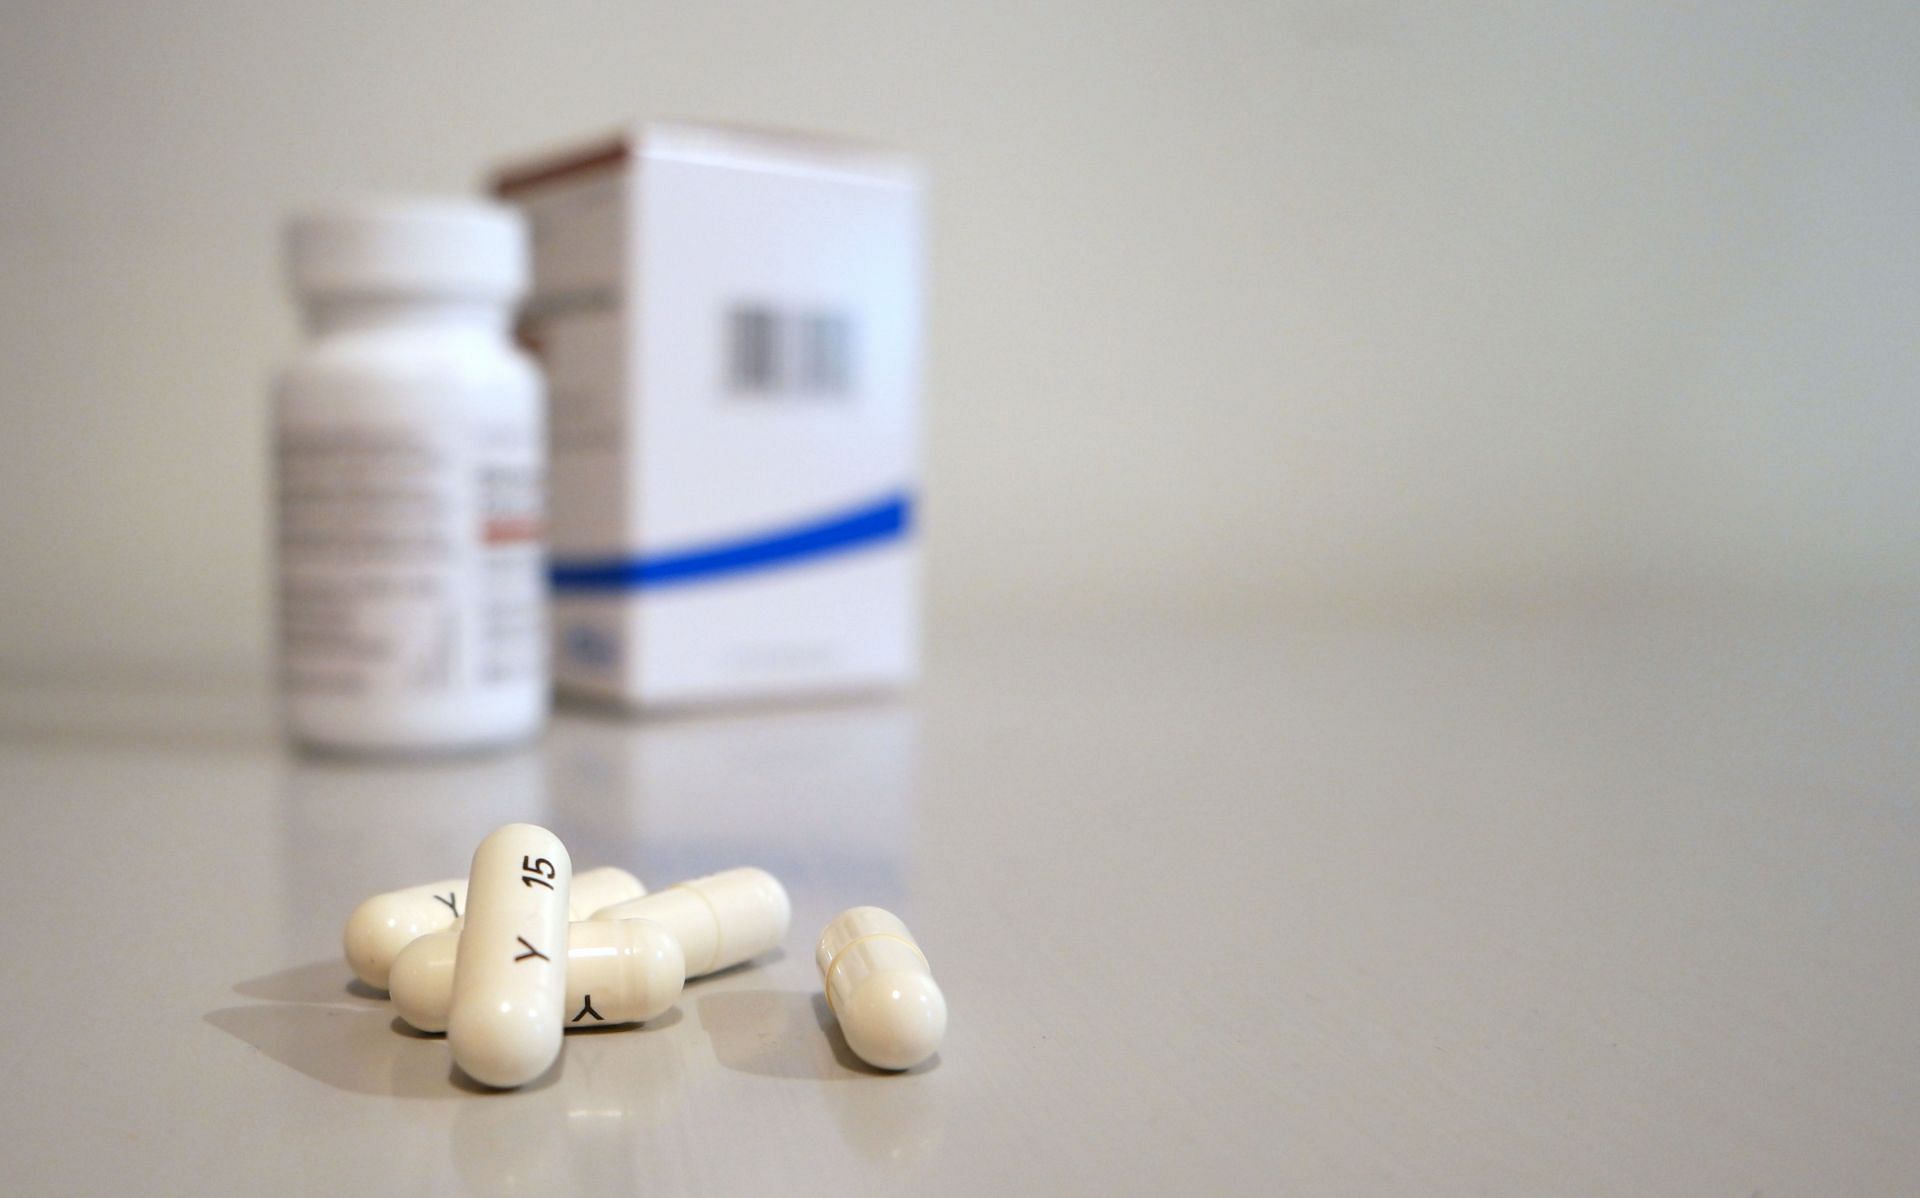 Weight loss pills are getting common these days. (Image via Pexels/ Julie Viken)